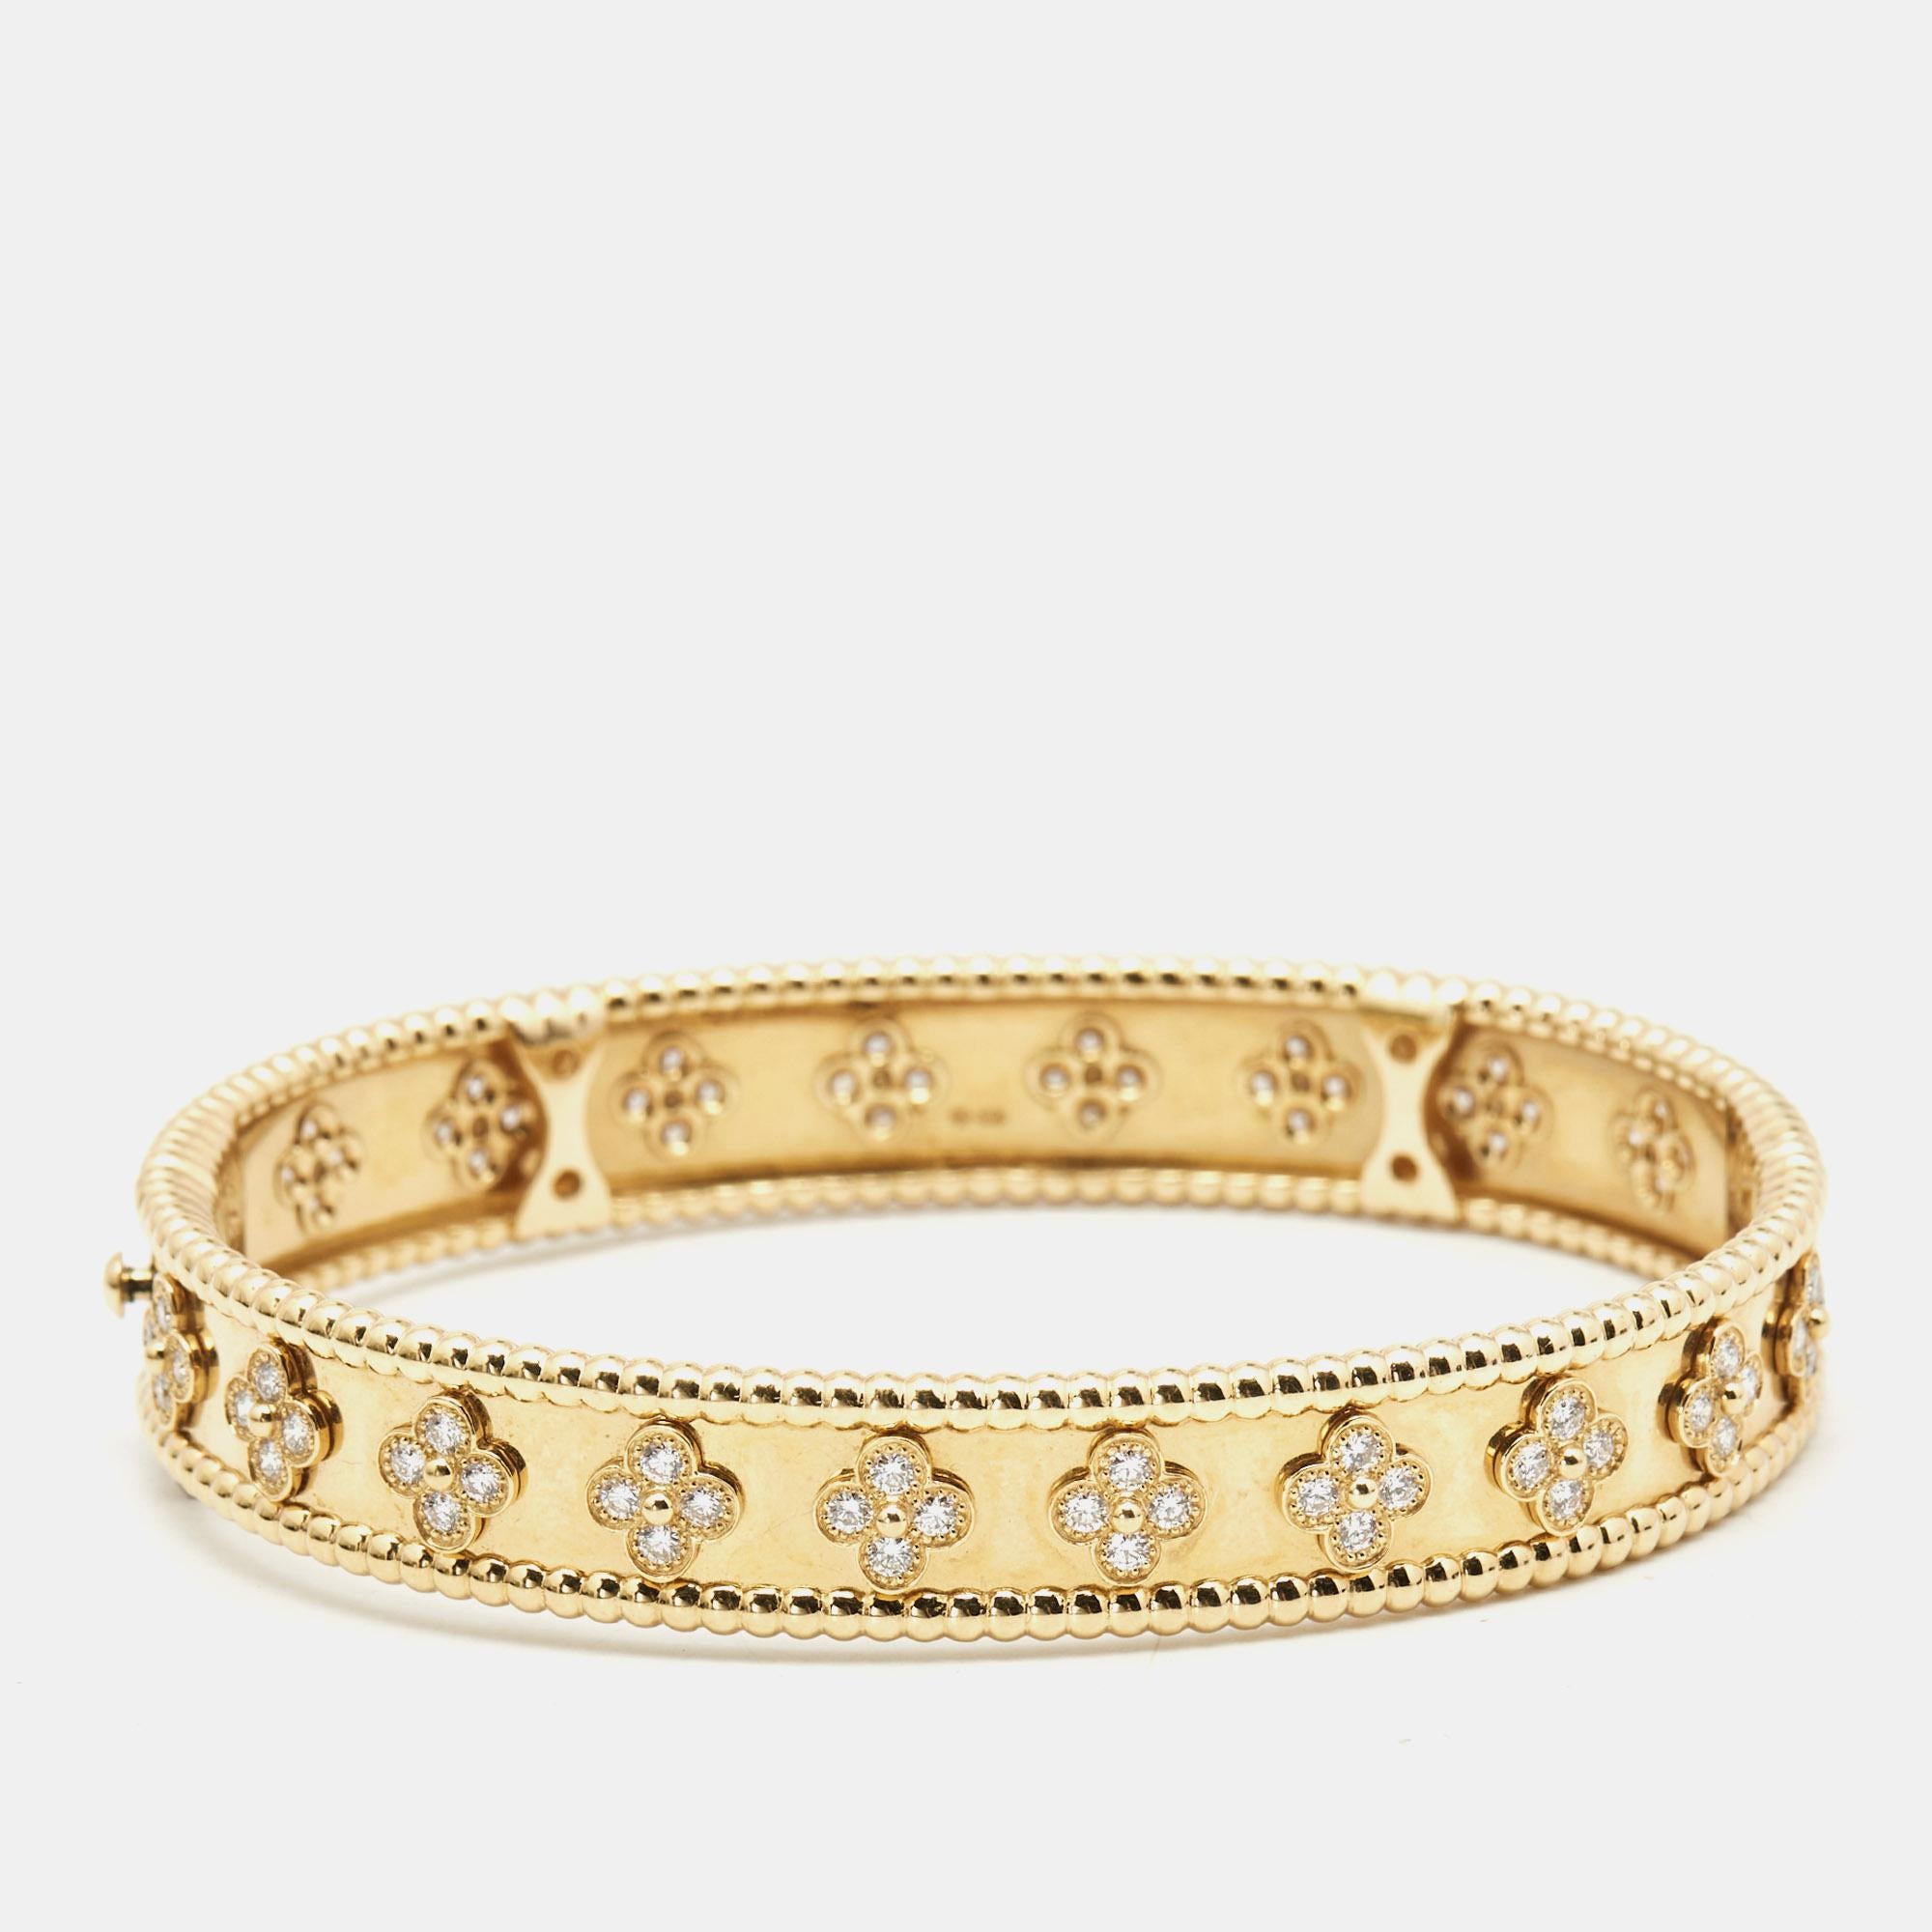 This Van Cleef & Arpels Perlée Sweet Clovers bracelet is a fine example of VC's prowess in jewelry making. It is sculpted using 18k yellow gold and beautified with rows of signature Perlée beads and diamond-studded clover motifs. The jewel is a